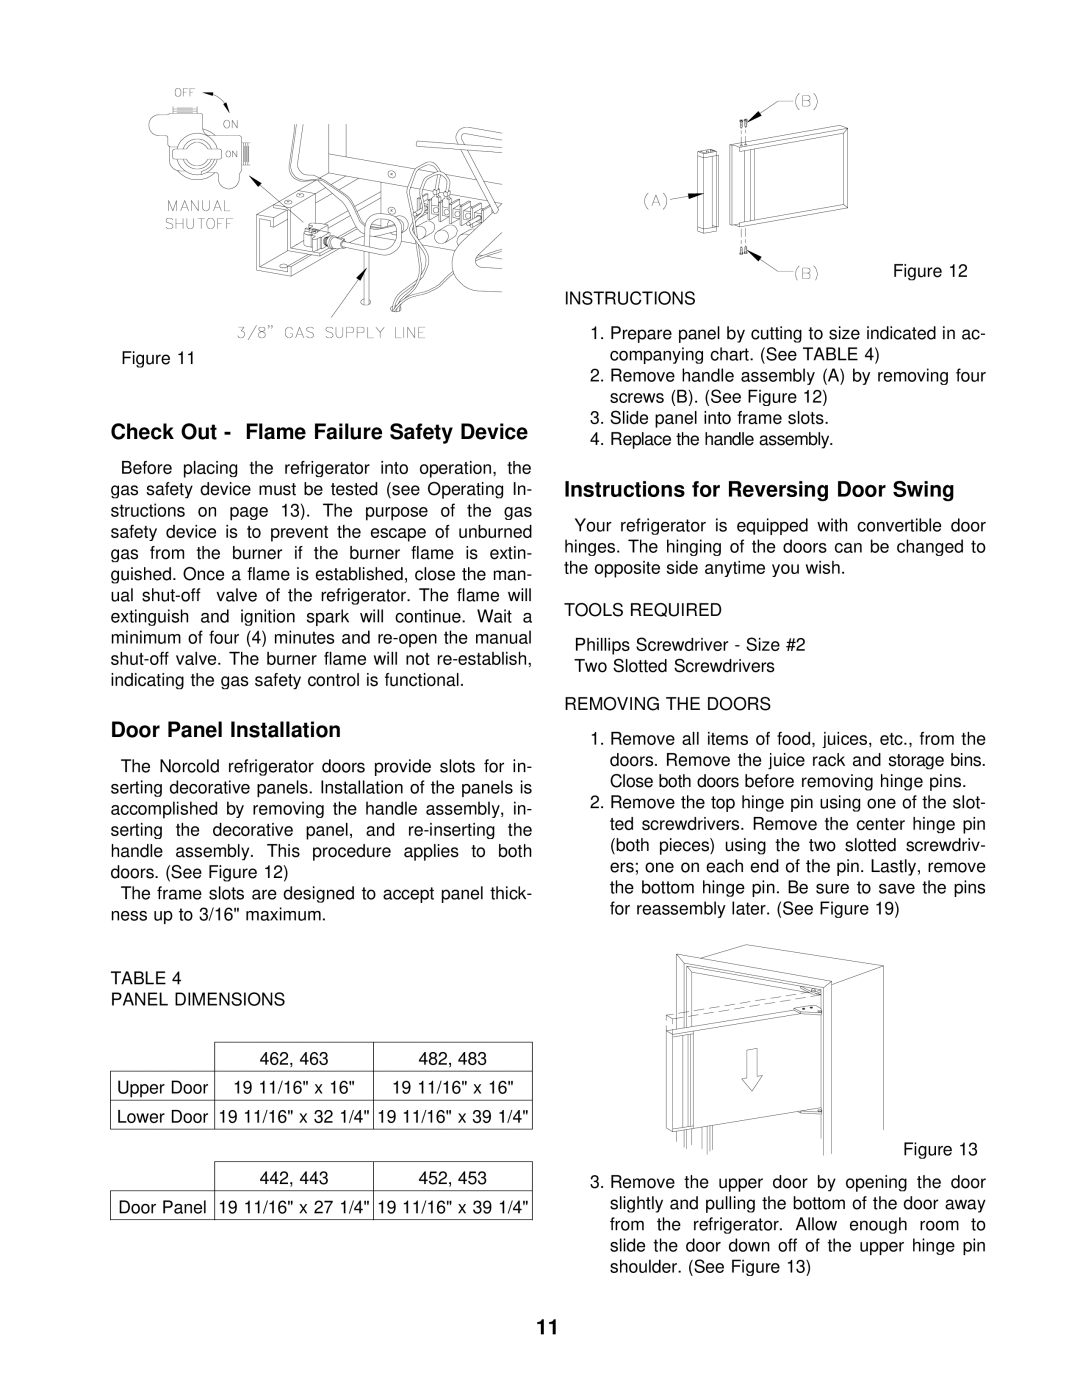 Norcold 482, 483 Check Out - Flame Failure Safety Device, Door Panel Installation, Instructions for Reversing Door Swing 